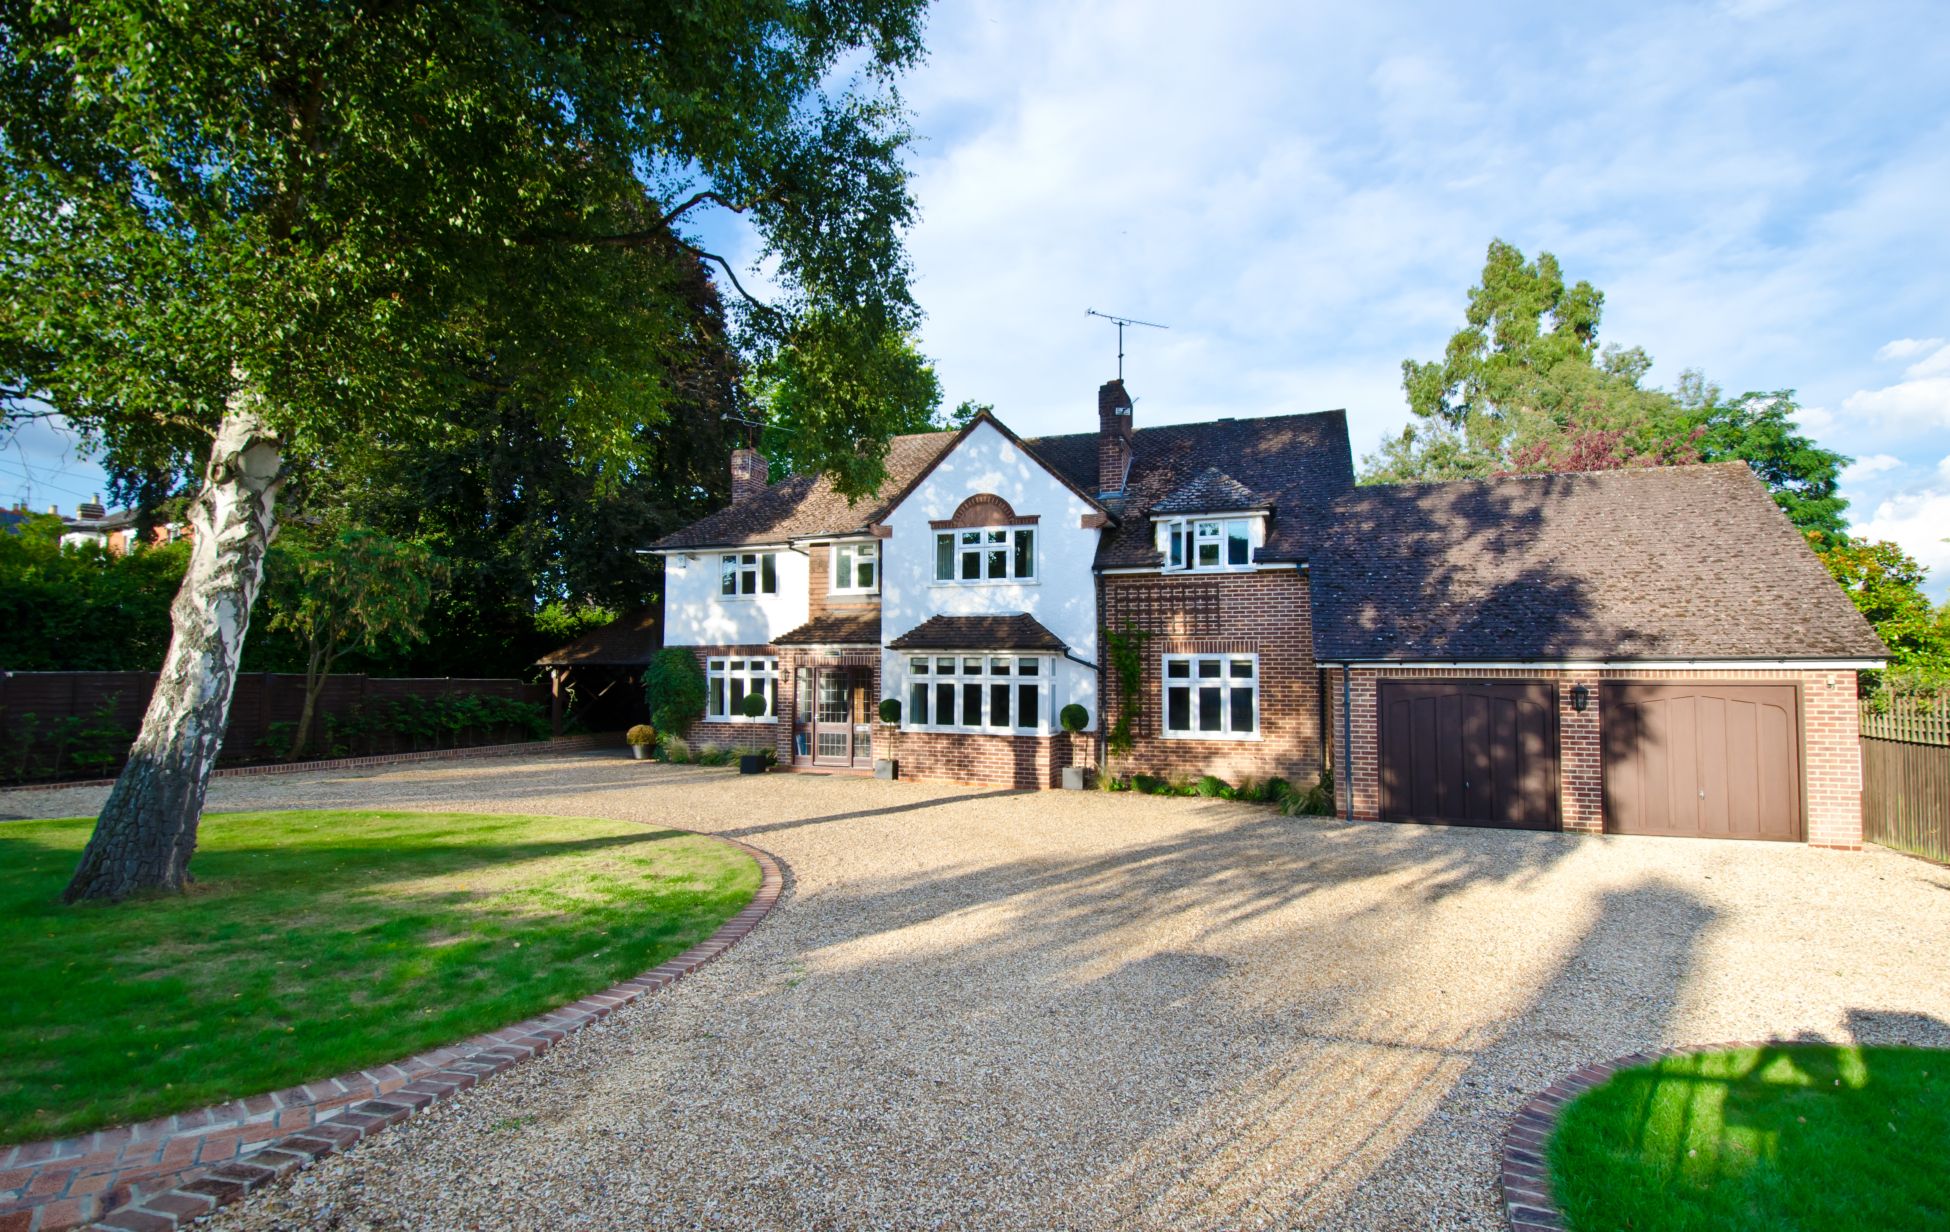 Residential detached house in Oxfordshire